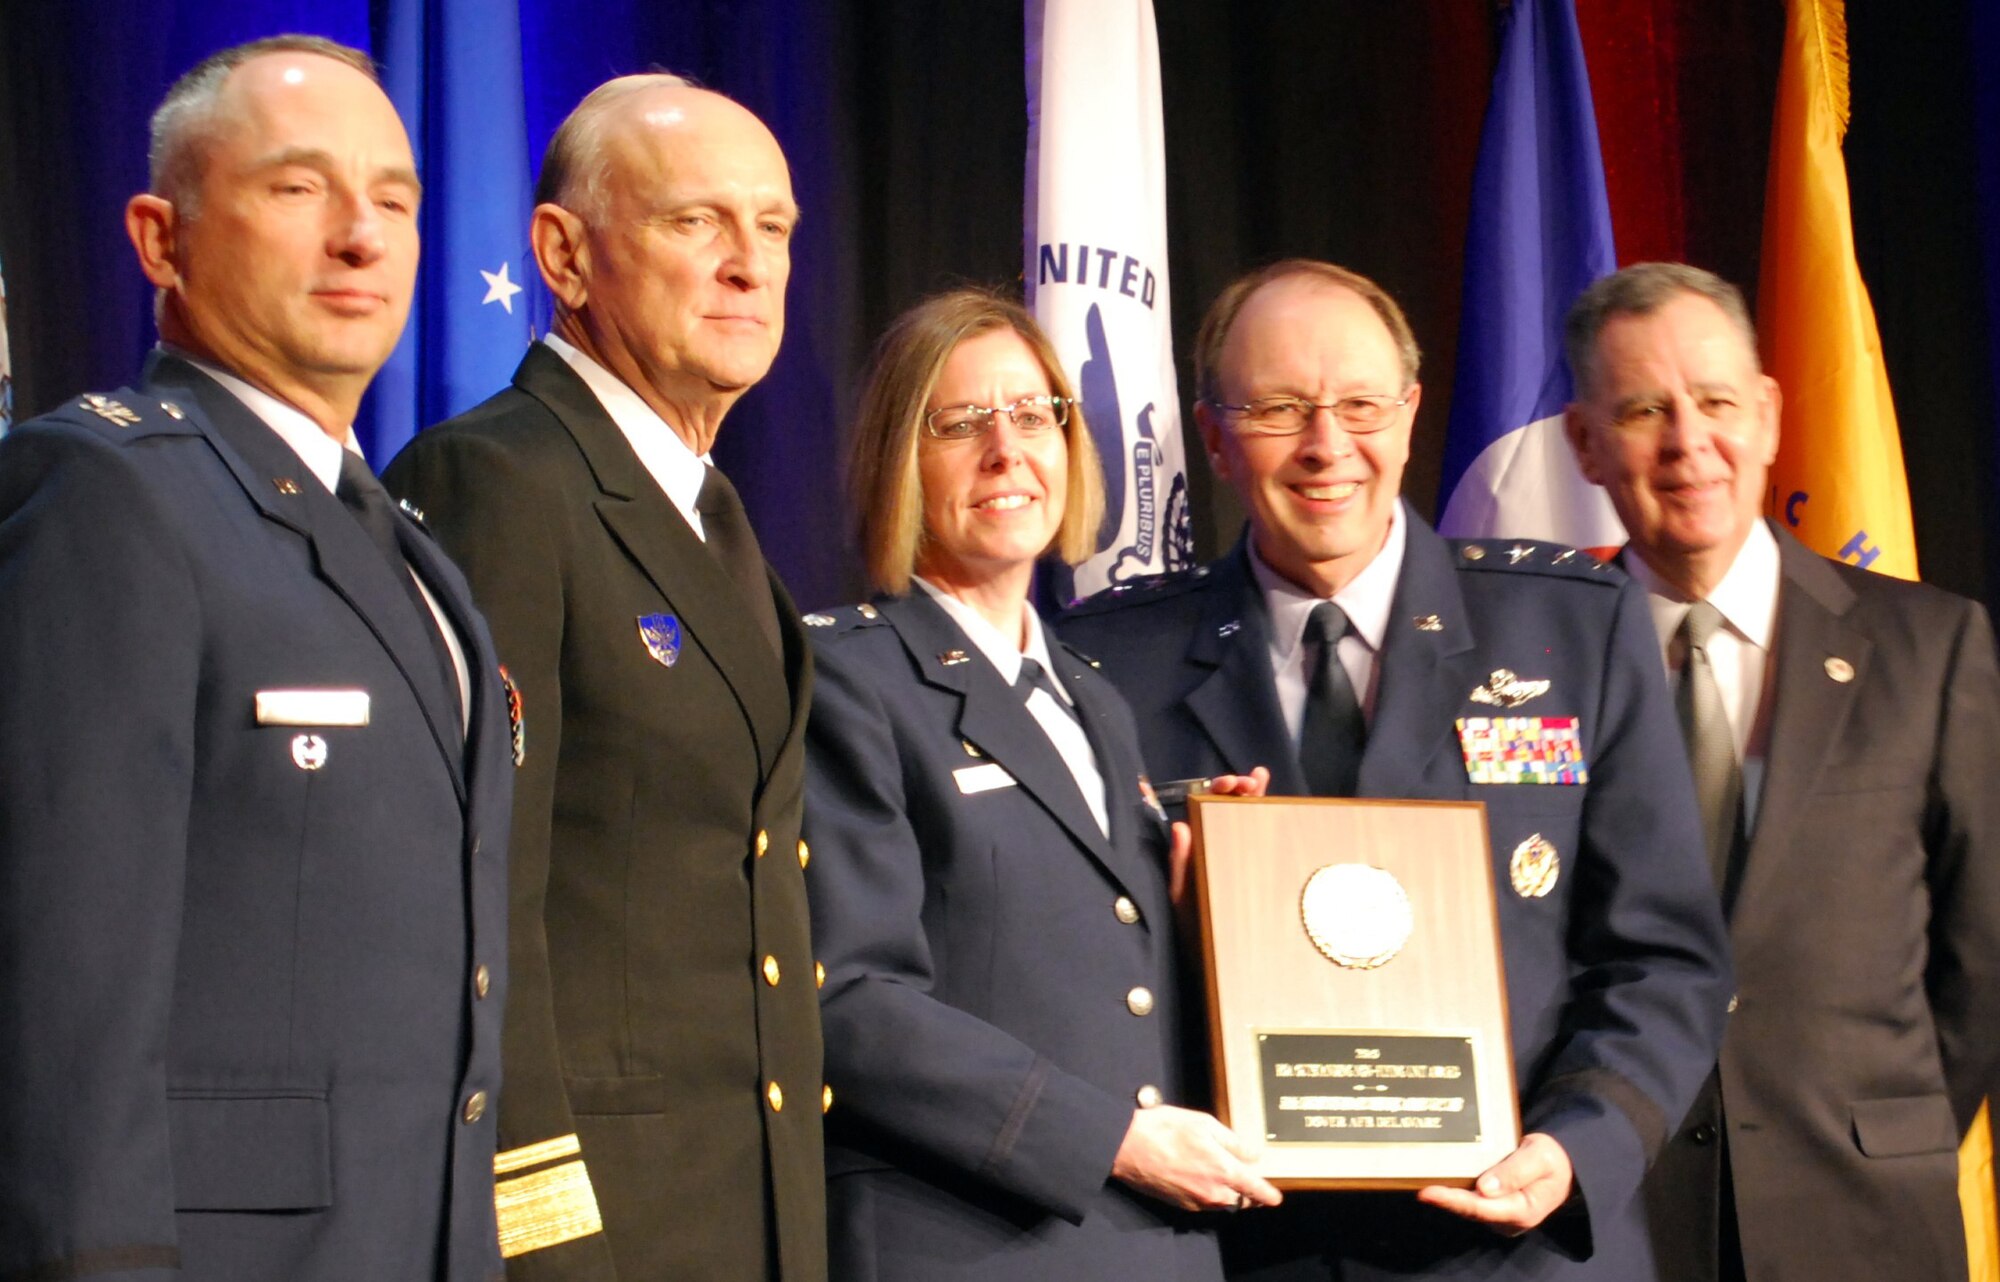 Lt. Col. Gretchen Wiltse, 512th Logistics Readiness Squadron commander, Dover Air Force Base, Del., accepts the Reserve Officer Association's Outstanding Non-Flying Unit Award at the ROA National Security Symposium in Washington, D.C., Jan. 31, 2011. From left, Col. Scott S. Russell, ROA's National Air Force vice president; retired Rear Adm. Paul T. Kayye, USN and ROA's national president; Colonel Wiltse; Lt. Gen. Charles E. Stenner Jr., chief of the Air Force Reserve and commander of Air Force Reserve Command; Dennis M. McCarthy, assistant secretary of Defense for Reserve Affairs. (U.S. Air Force photo/Col. Bob Thompson)